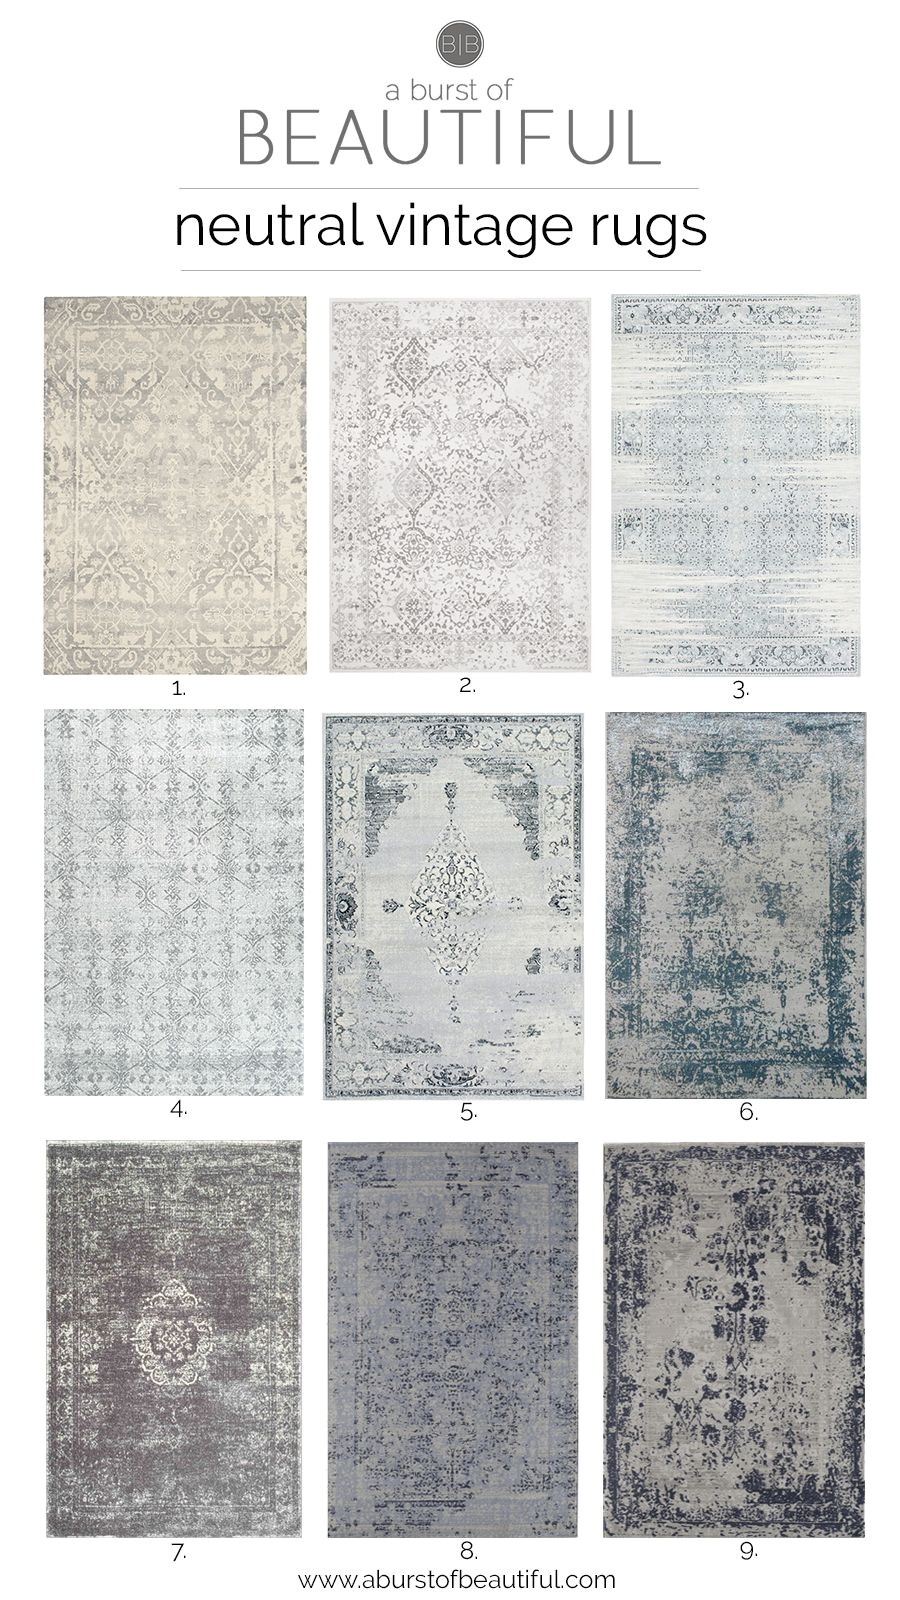 neutral vintage area rugs are an easy way to add color texture and pattern to any space in your home